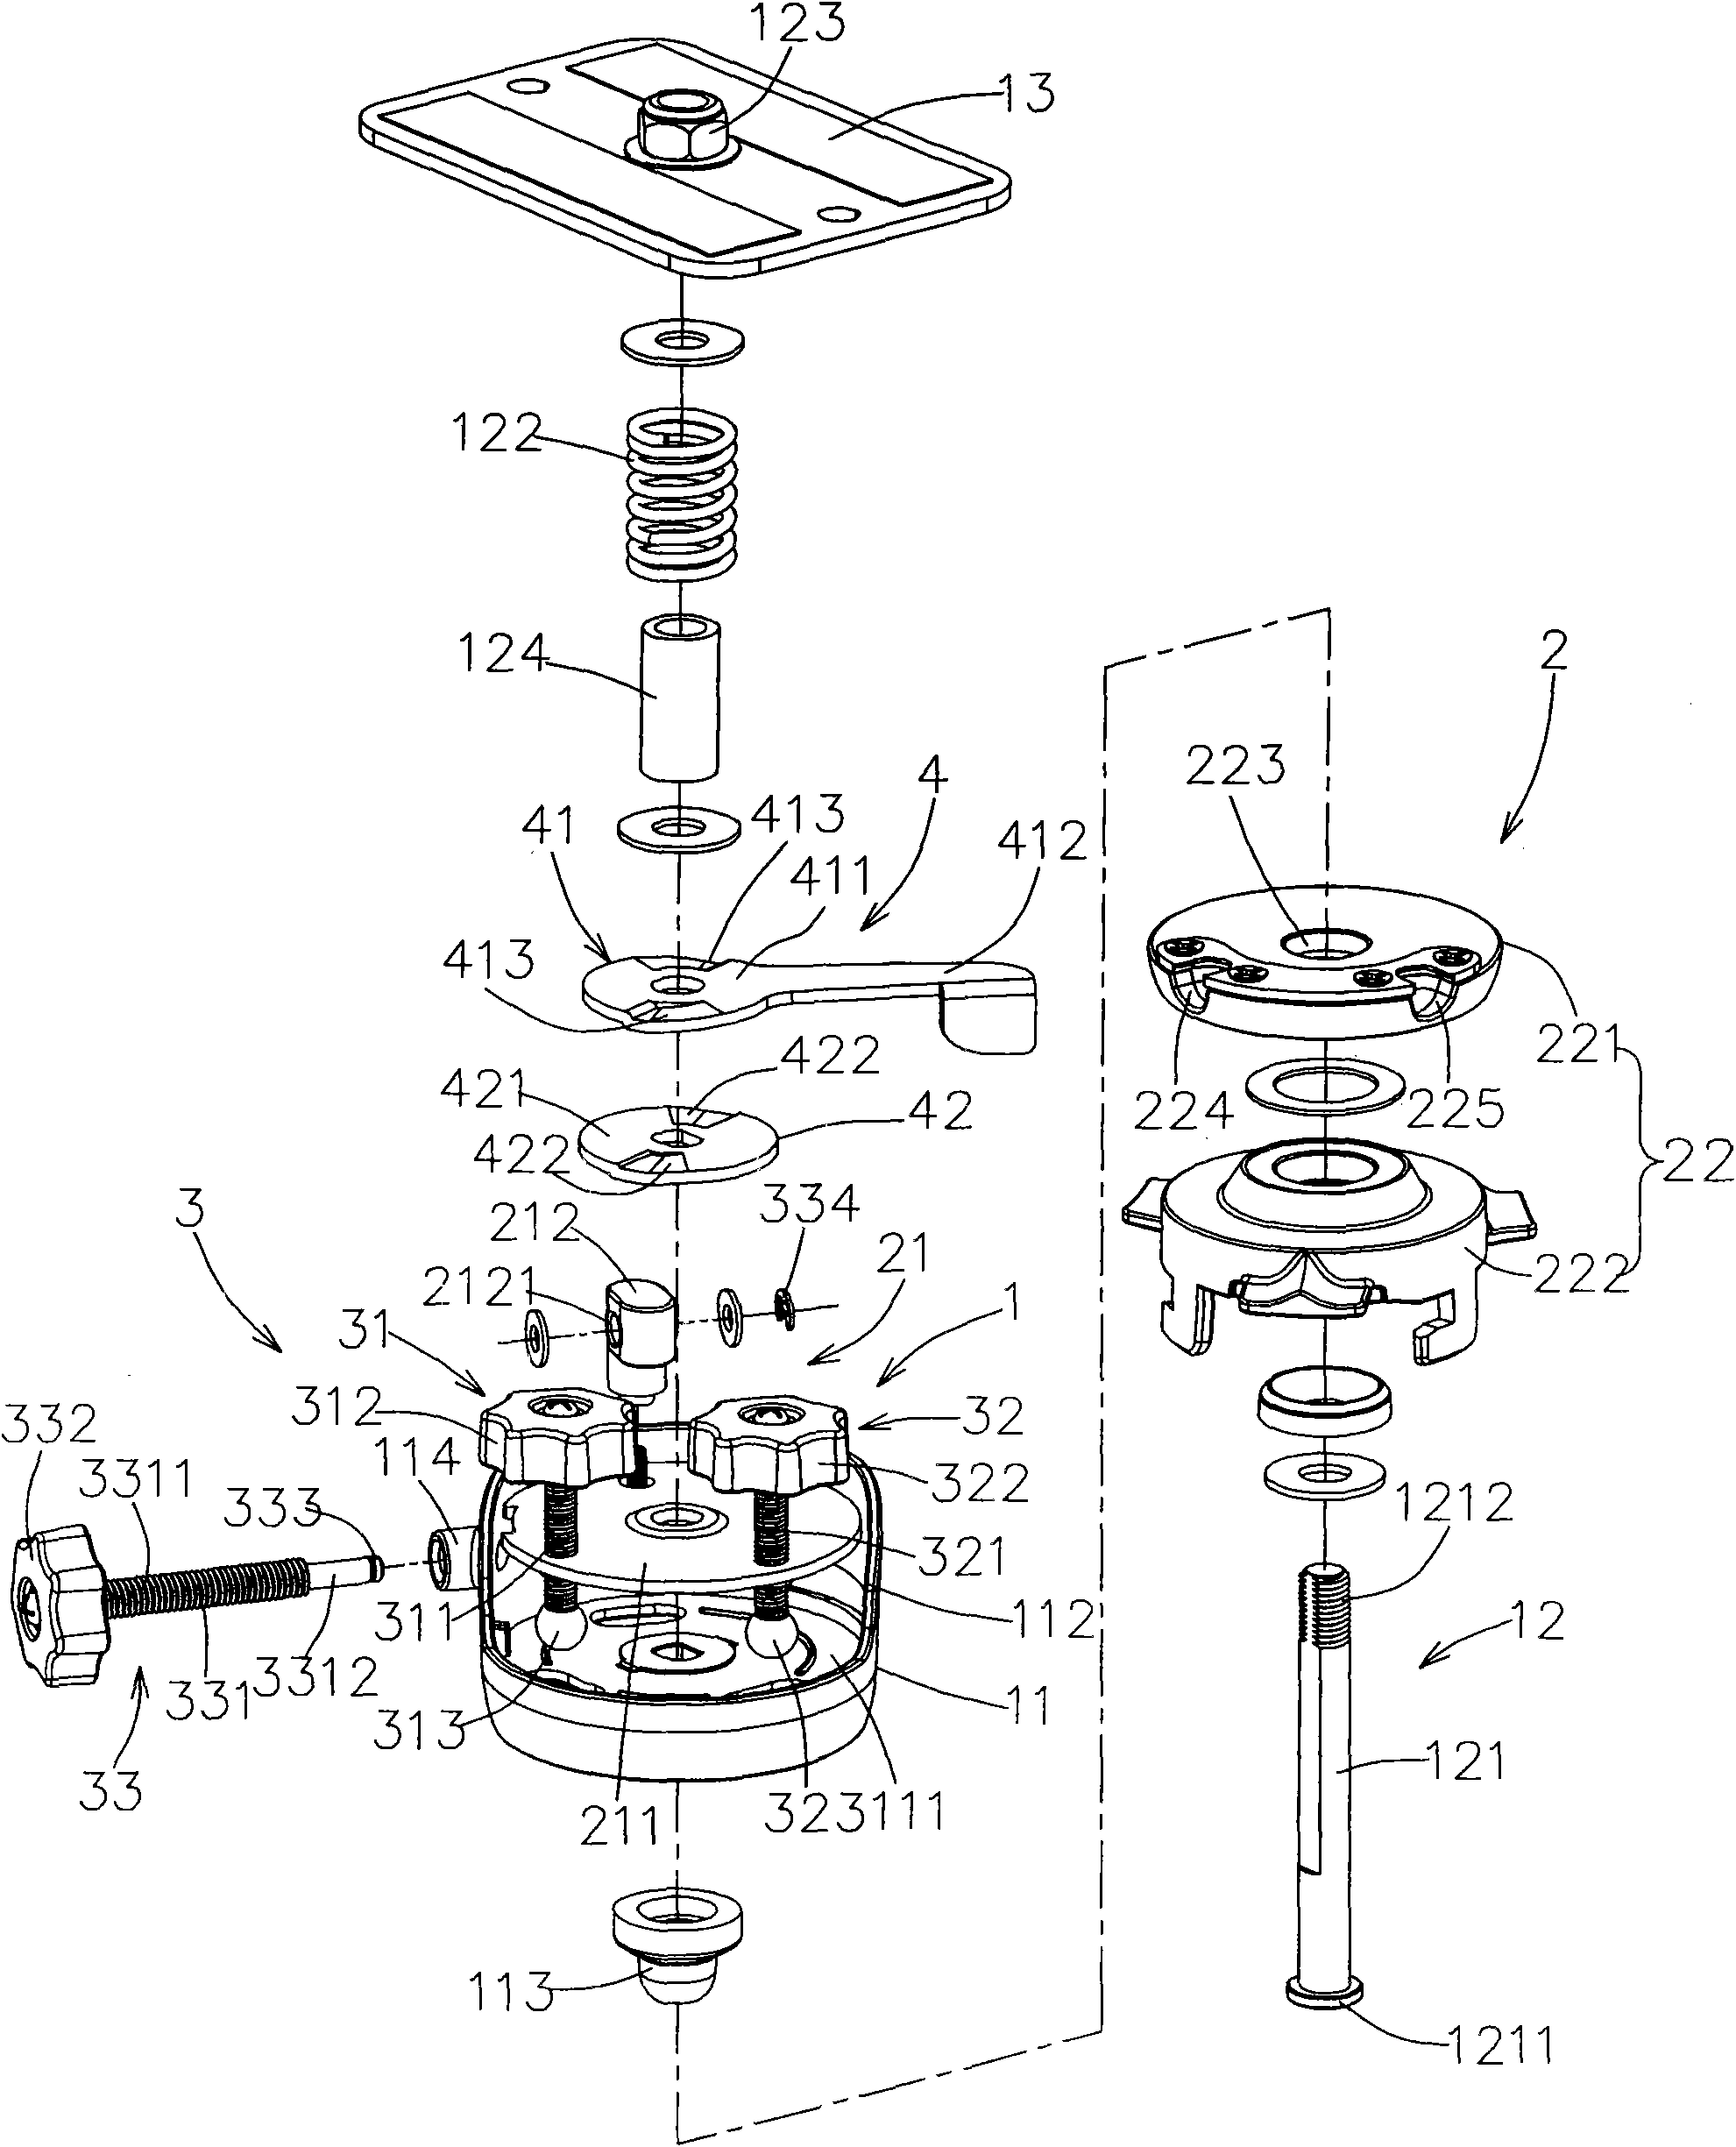 Bearing device capable of fine-turning rotating angle and inclination